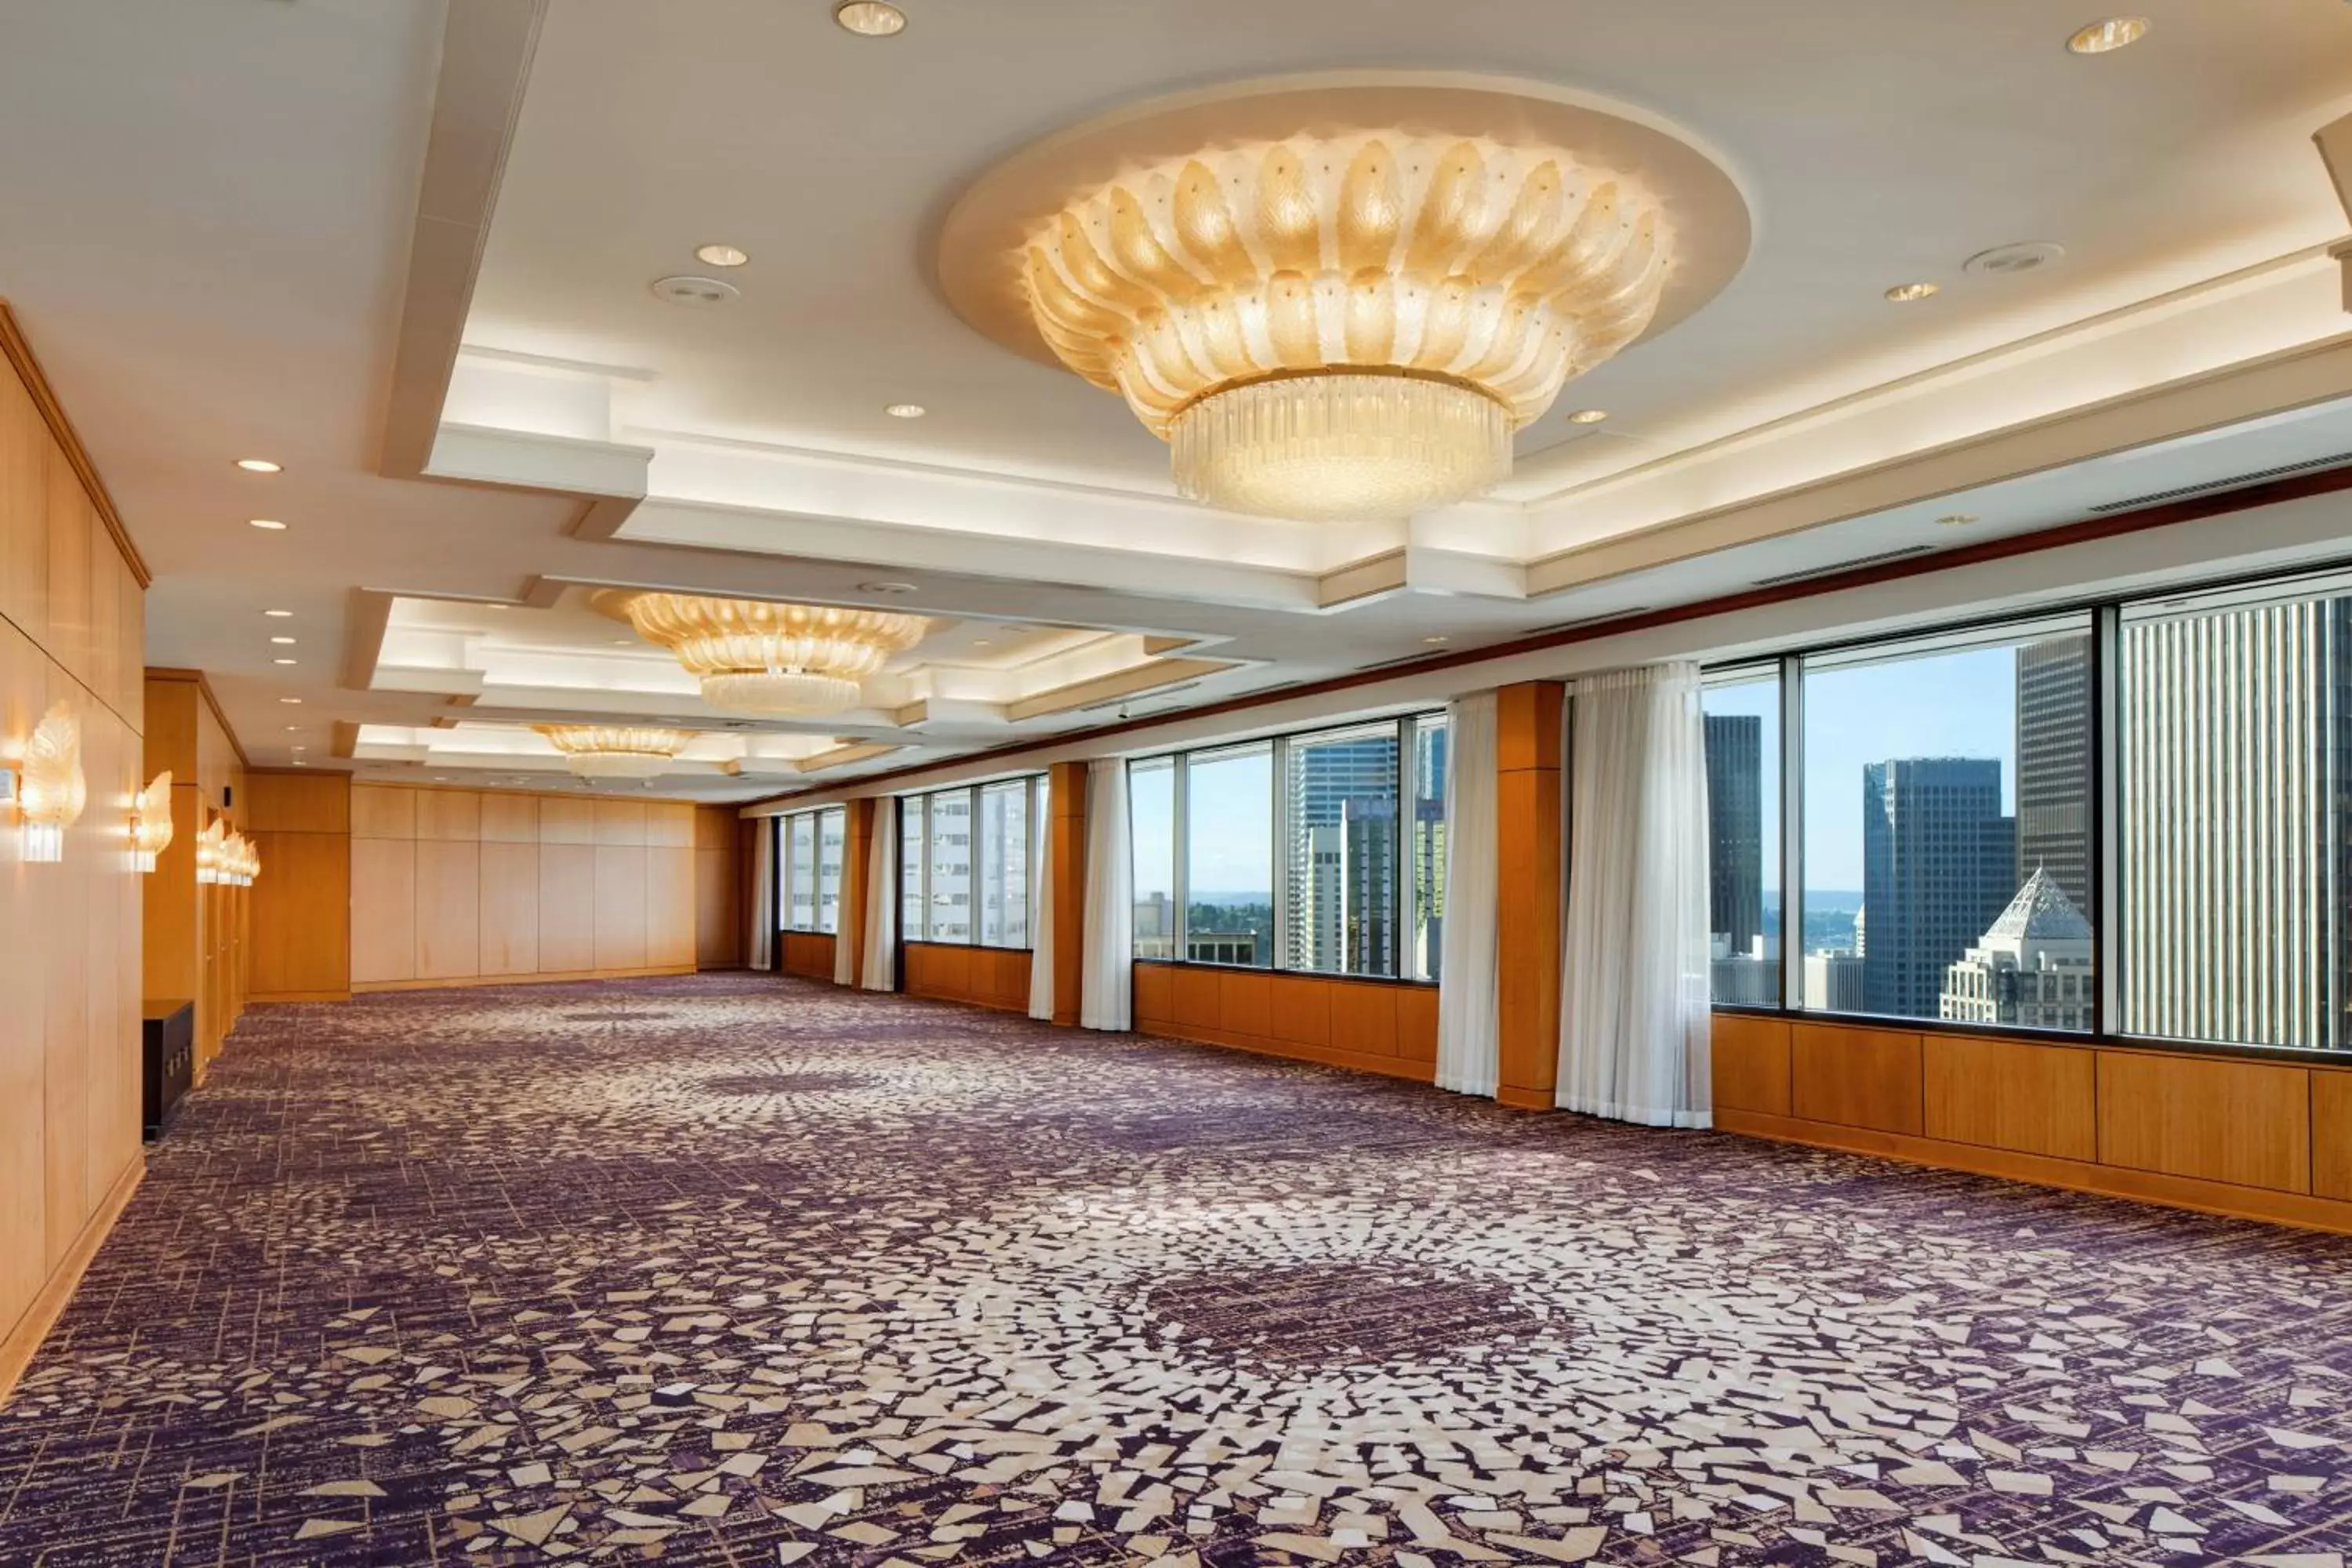 Meeting/conference room, Banquet Facilities in Sheraton Grand Seattle